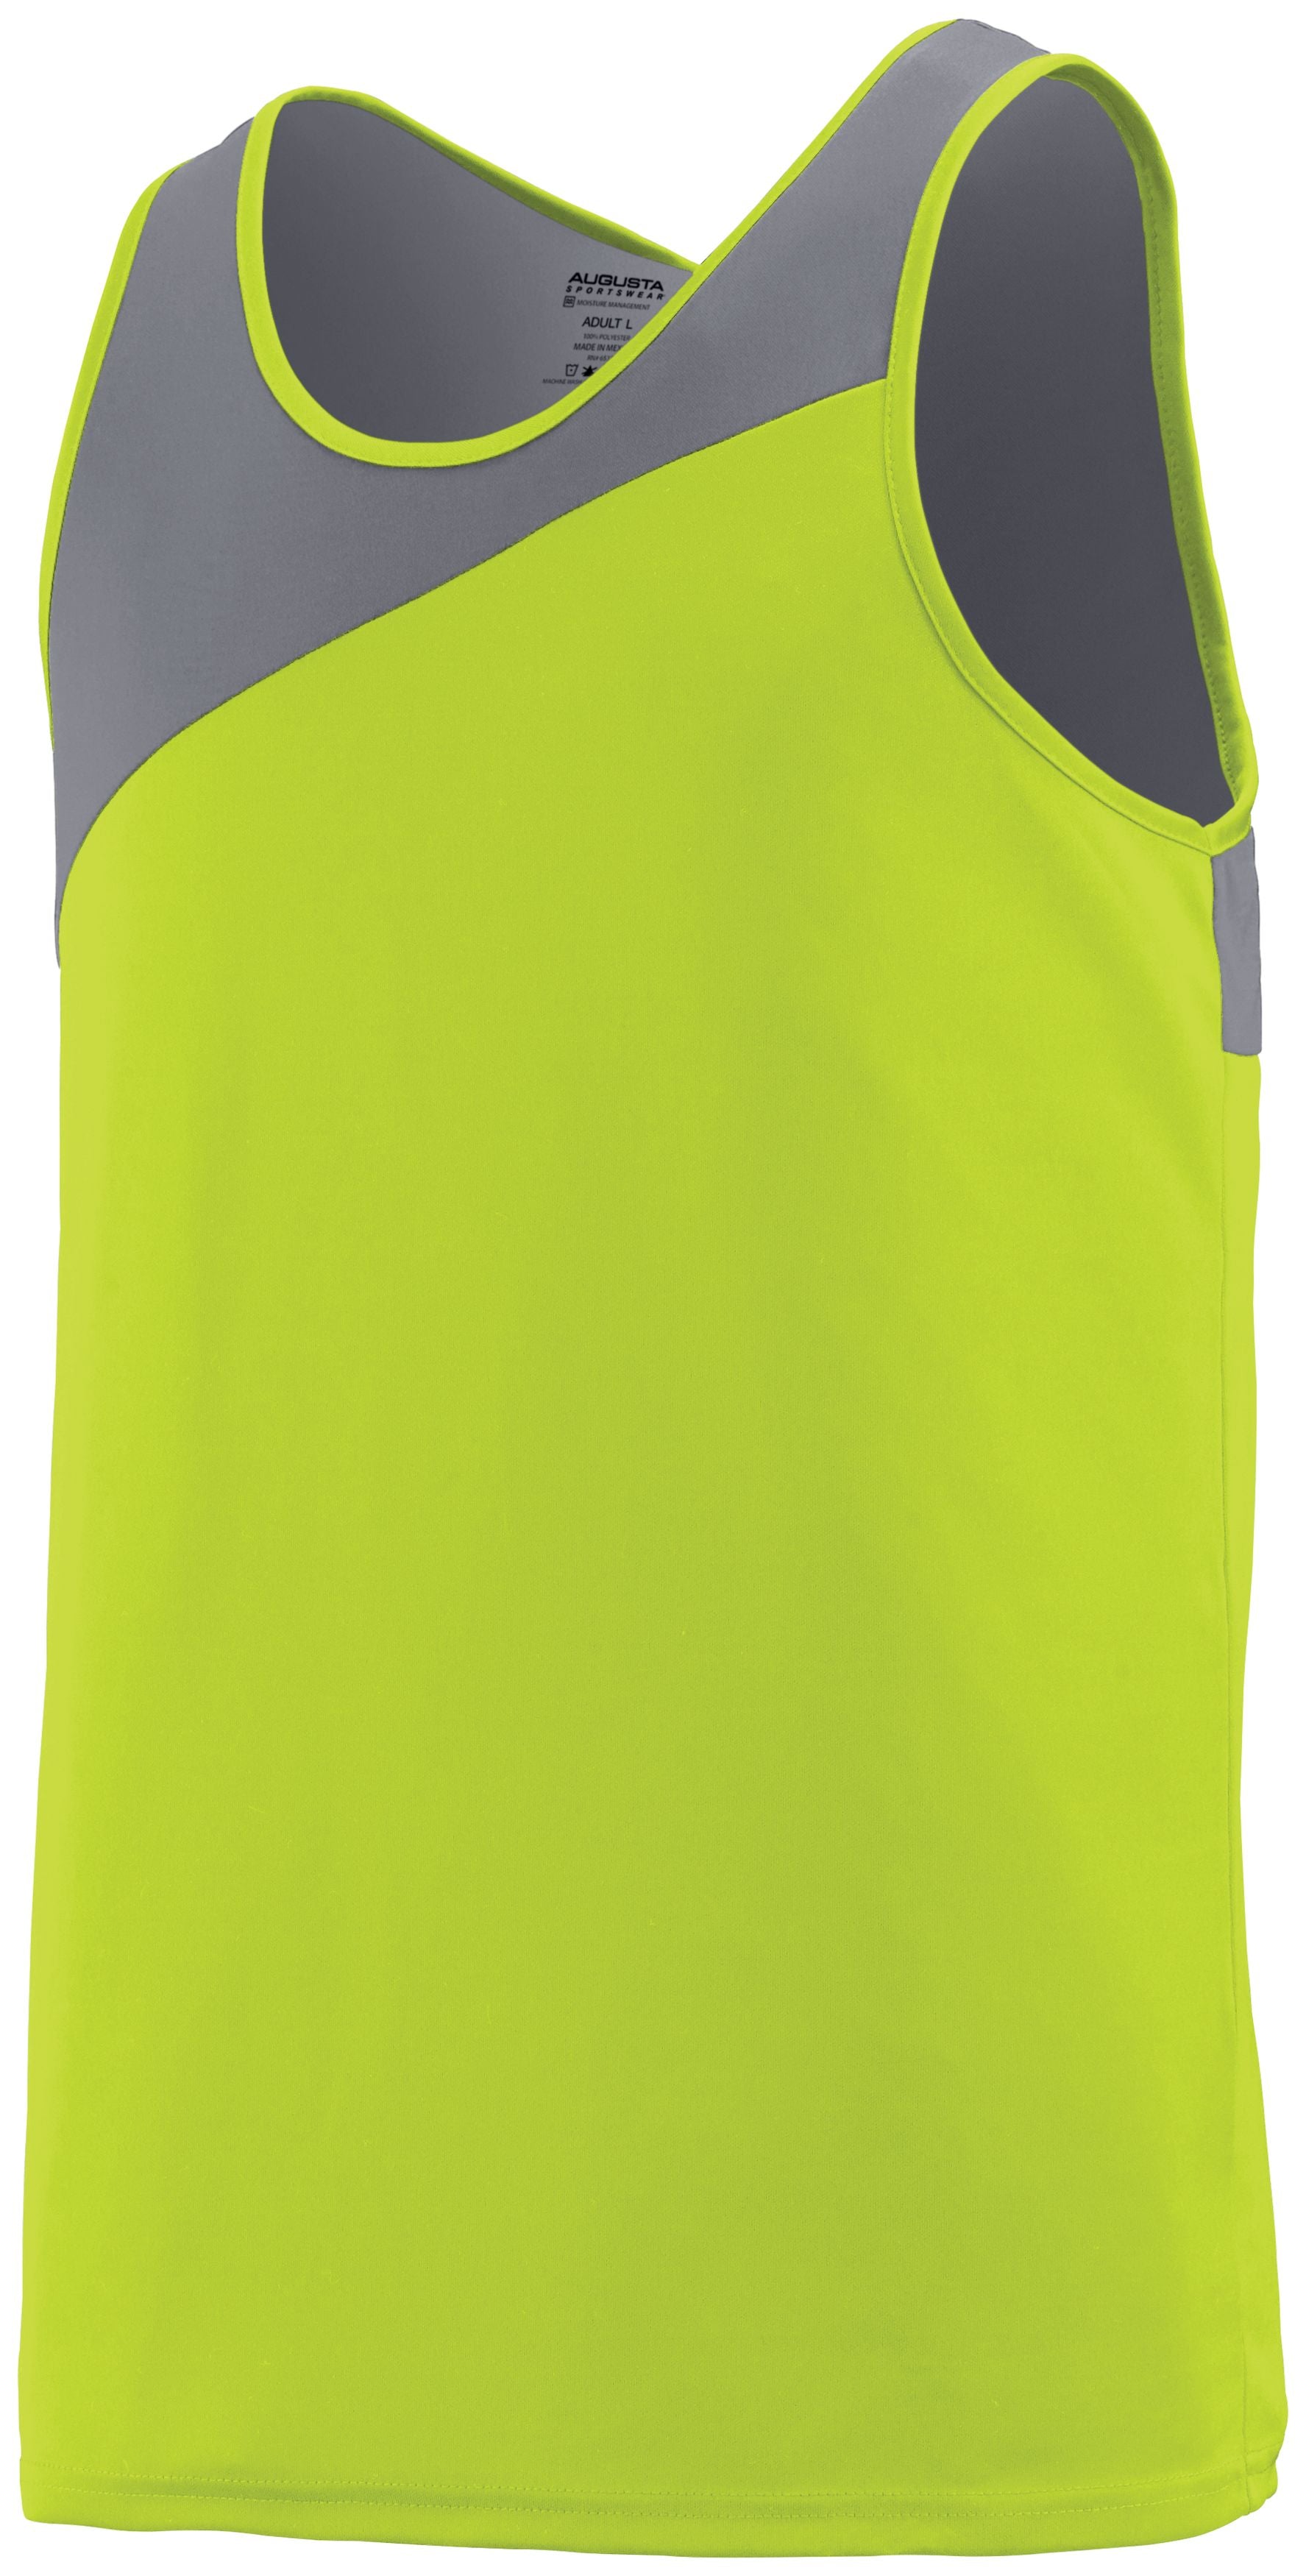 Augusta Sportswear Accelerate Jersey in Lime/Graphite  -Part of the Adult, Adult-Jersey, Augusta-Products, Track-Field, Shirts product lines at KanaleyCreations.com